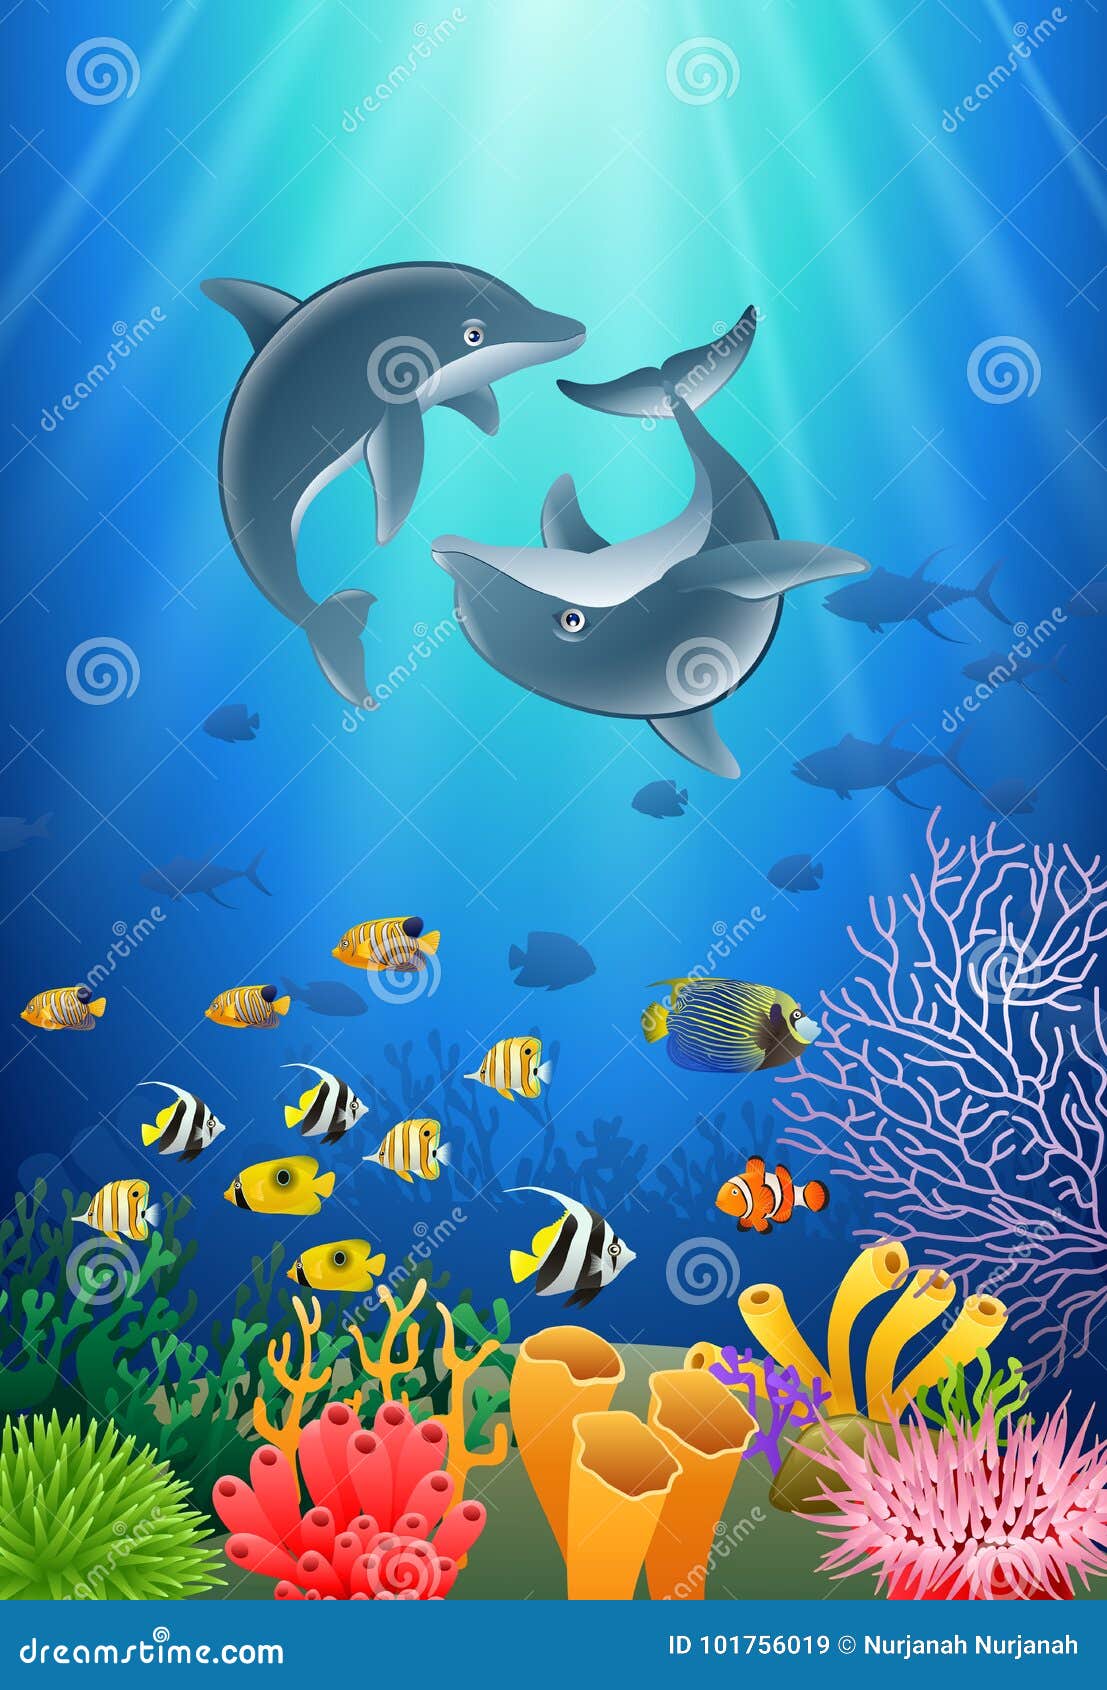 Dolphin Cartoon with Underwater View Stock Vector - Illustration of dolphins,  ecosystem: 101756019